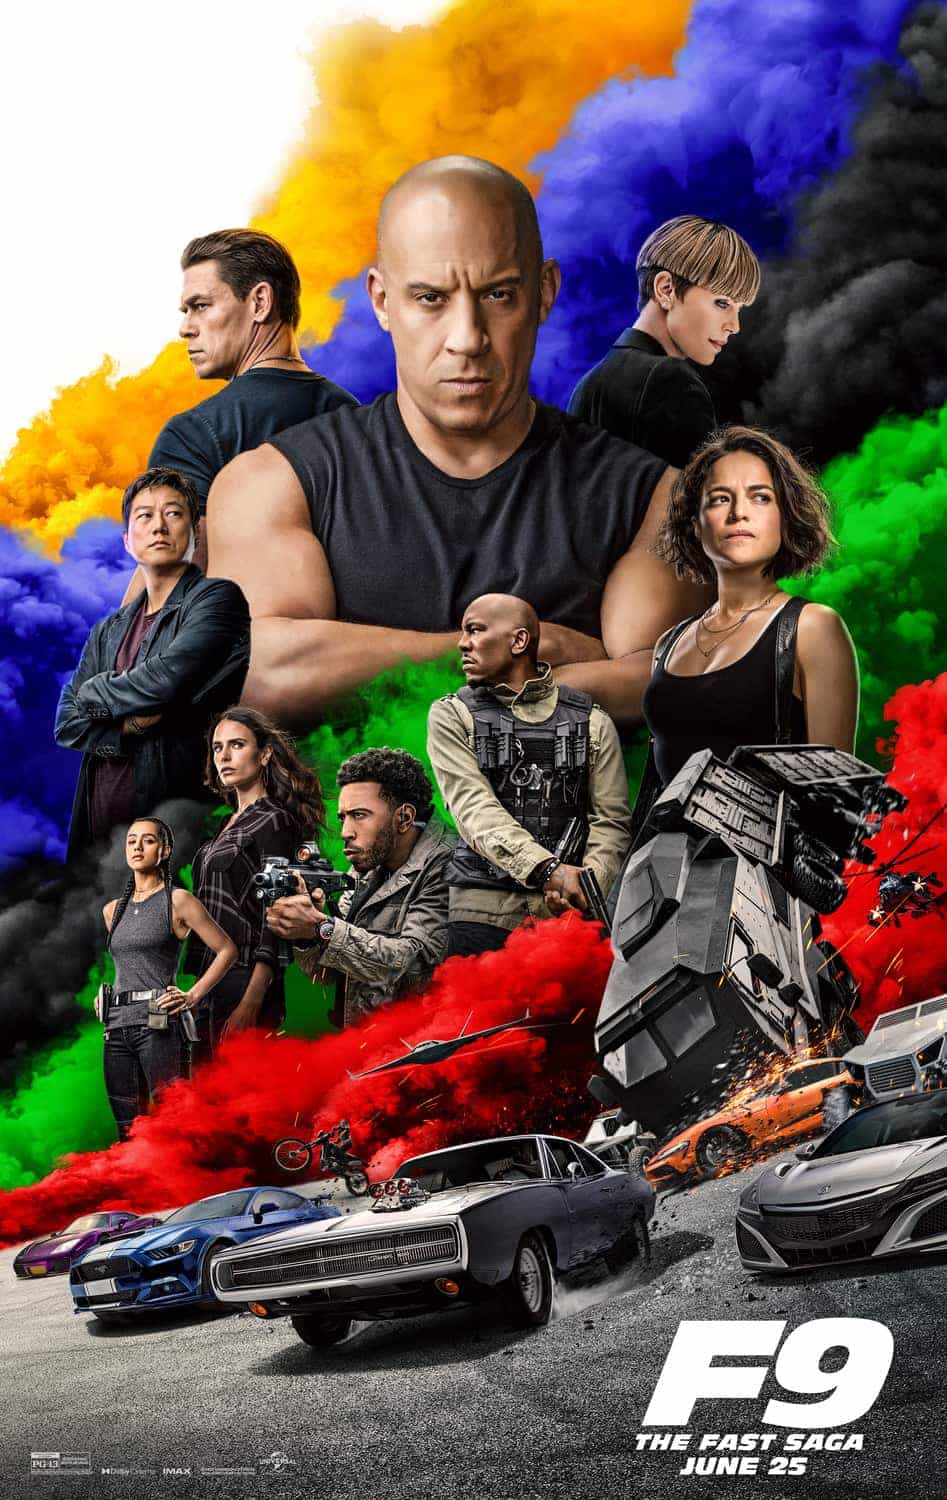 World Box Office Weekend Report 21st - 23rd May 2021:  Fast 9 makes its global debut at the top with a strong Chinese box office showing